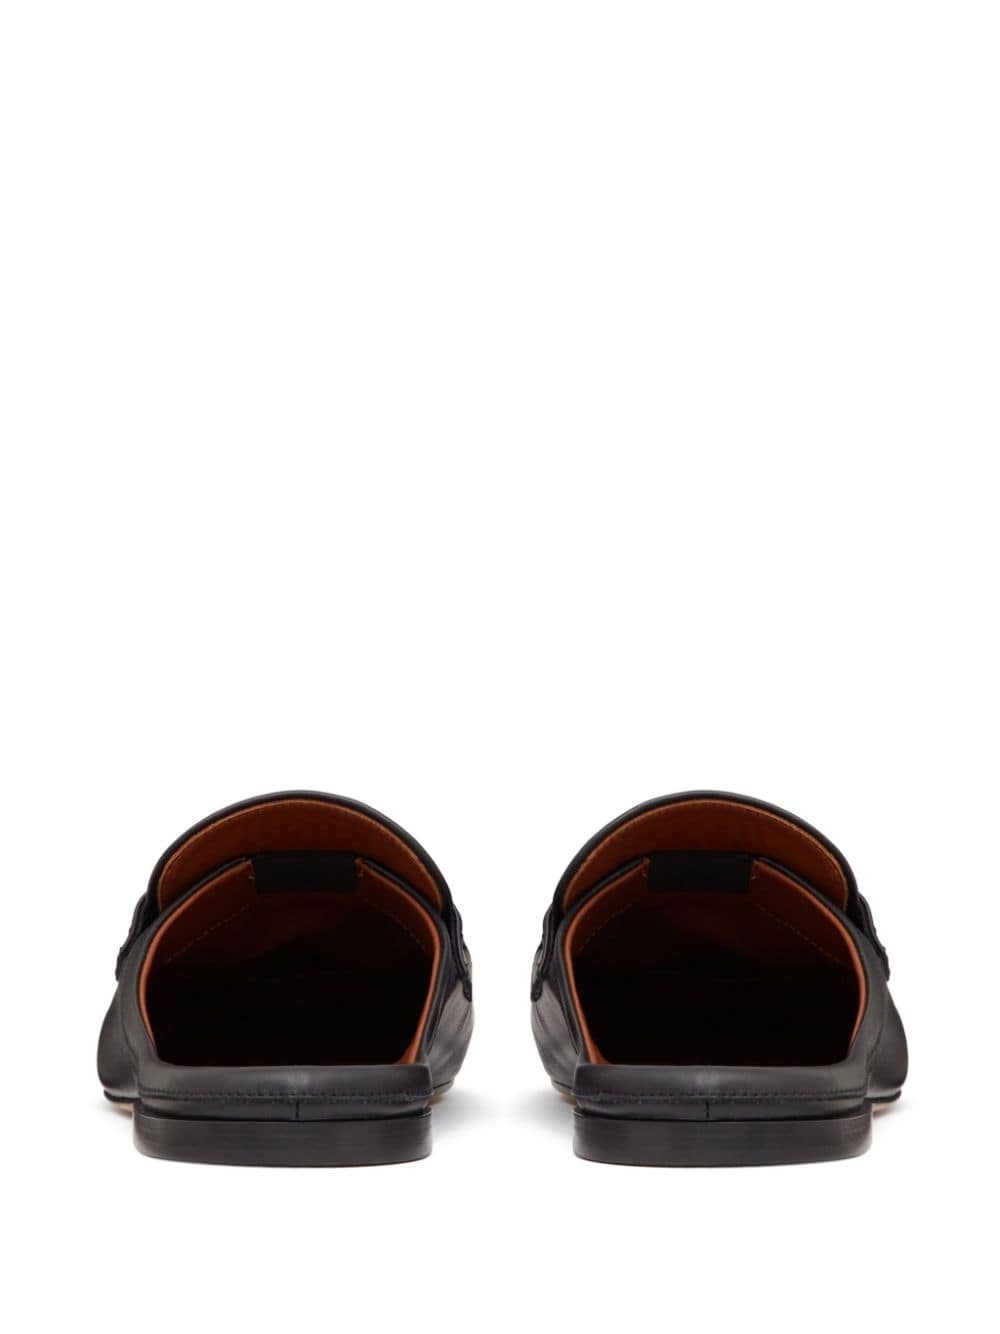 VLogo leather slippers - 3